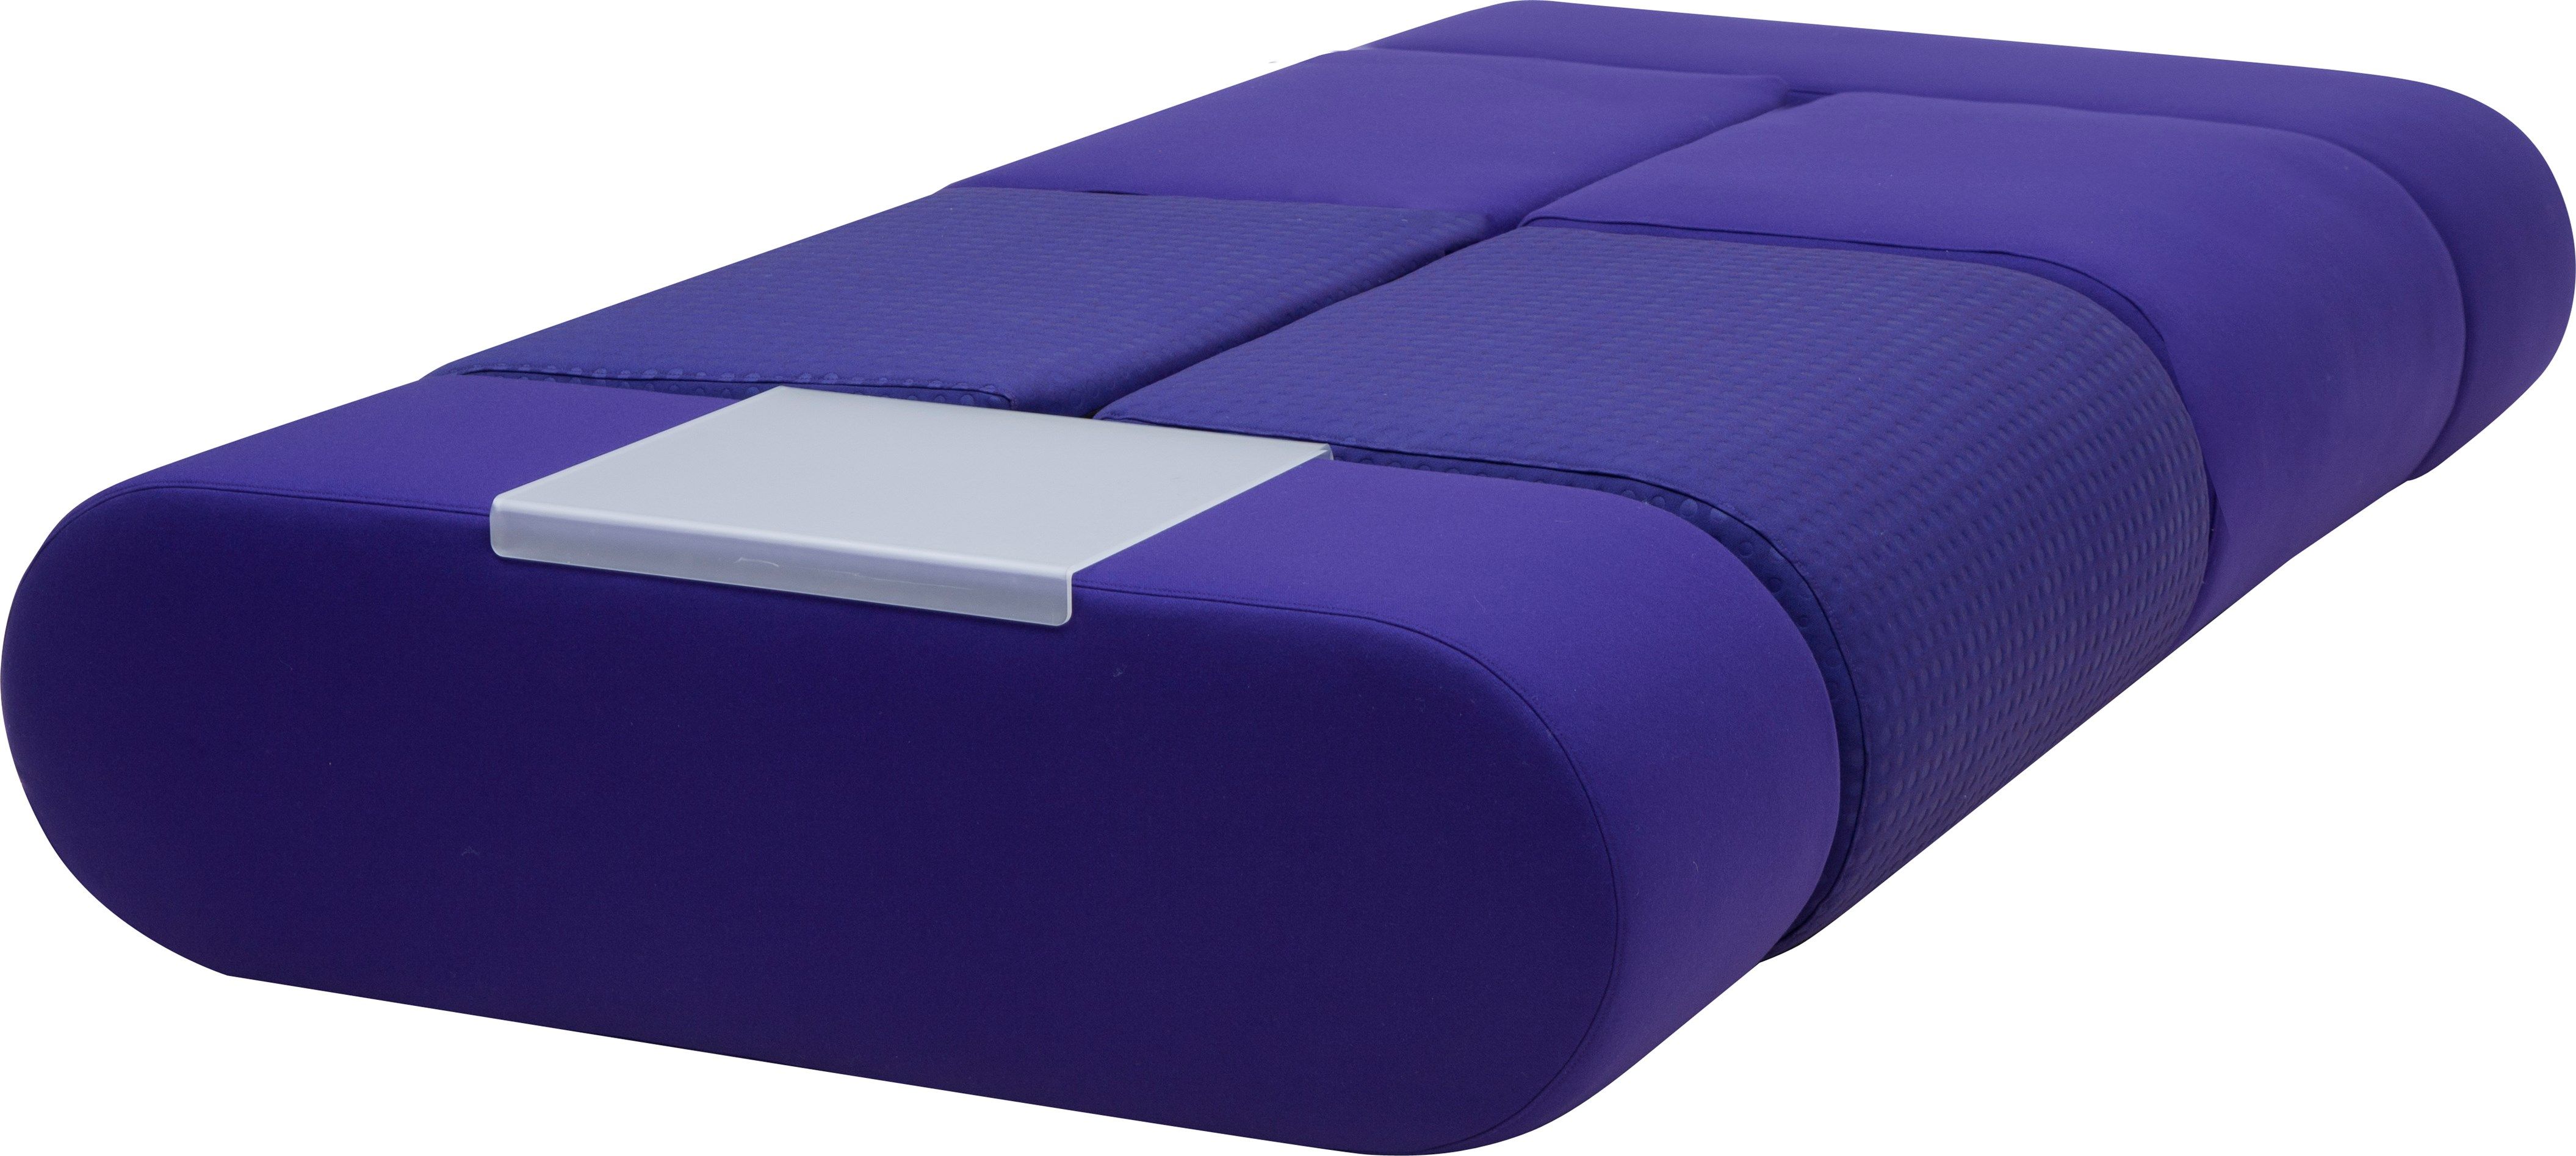 Sofa Bed Heart by Softline